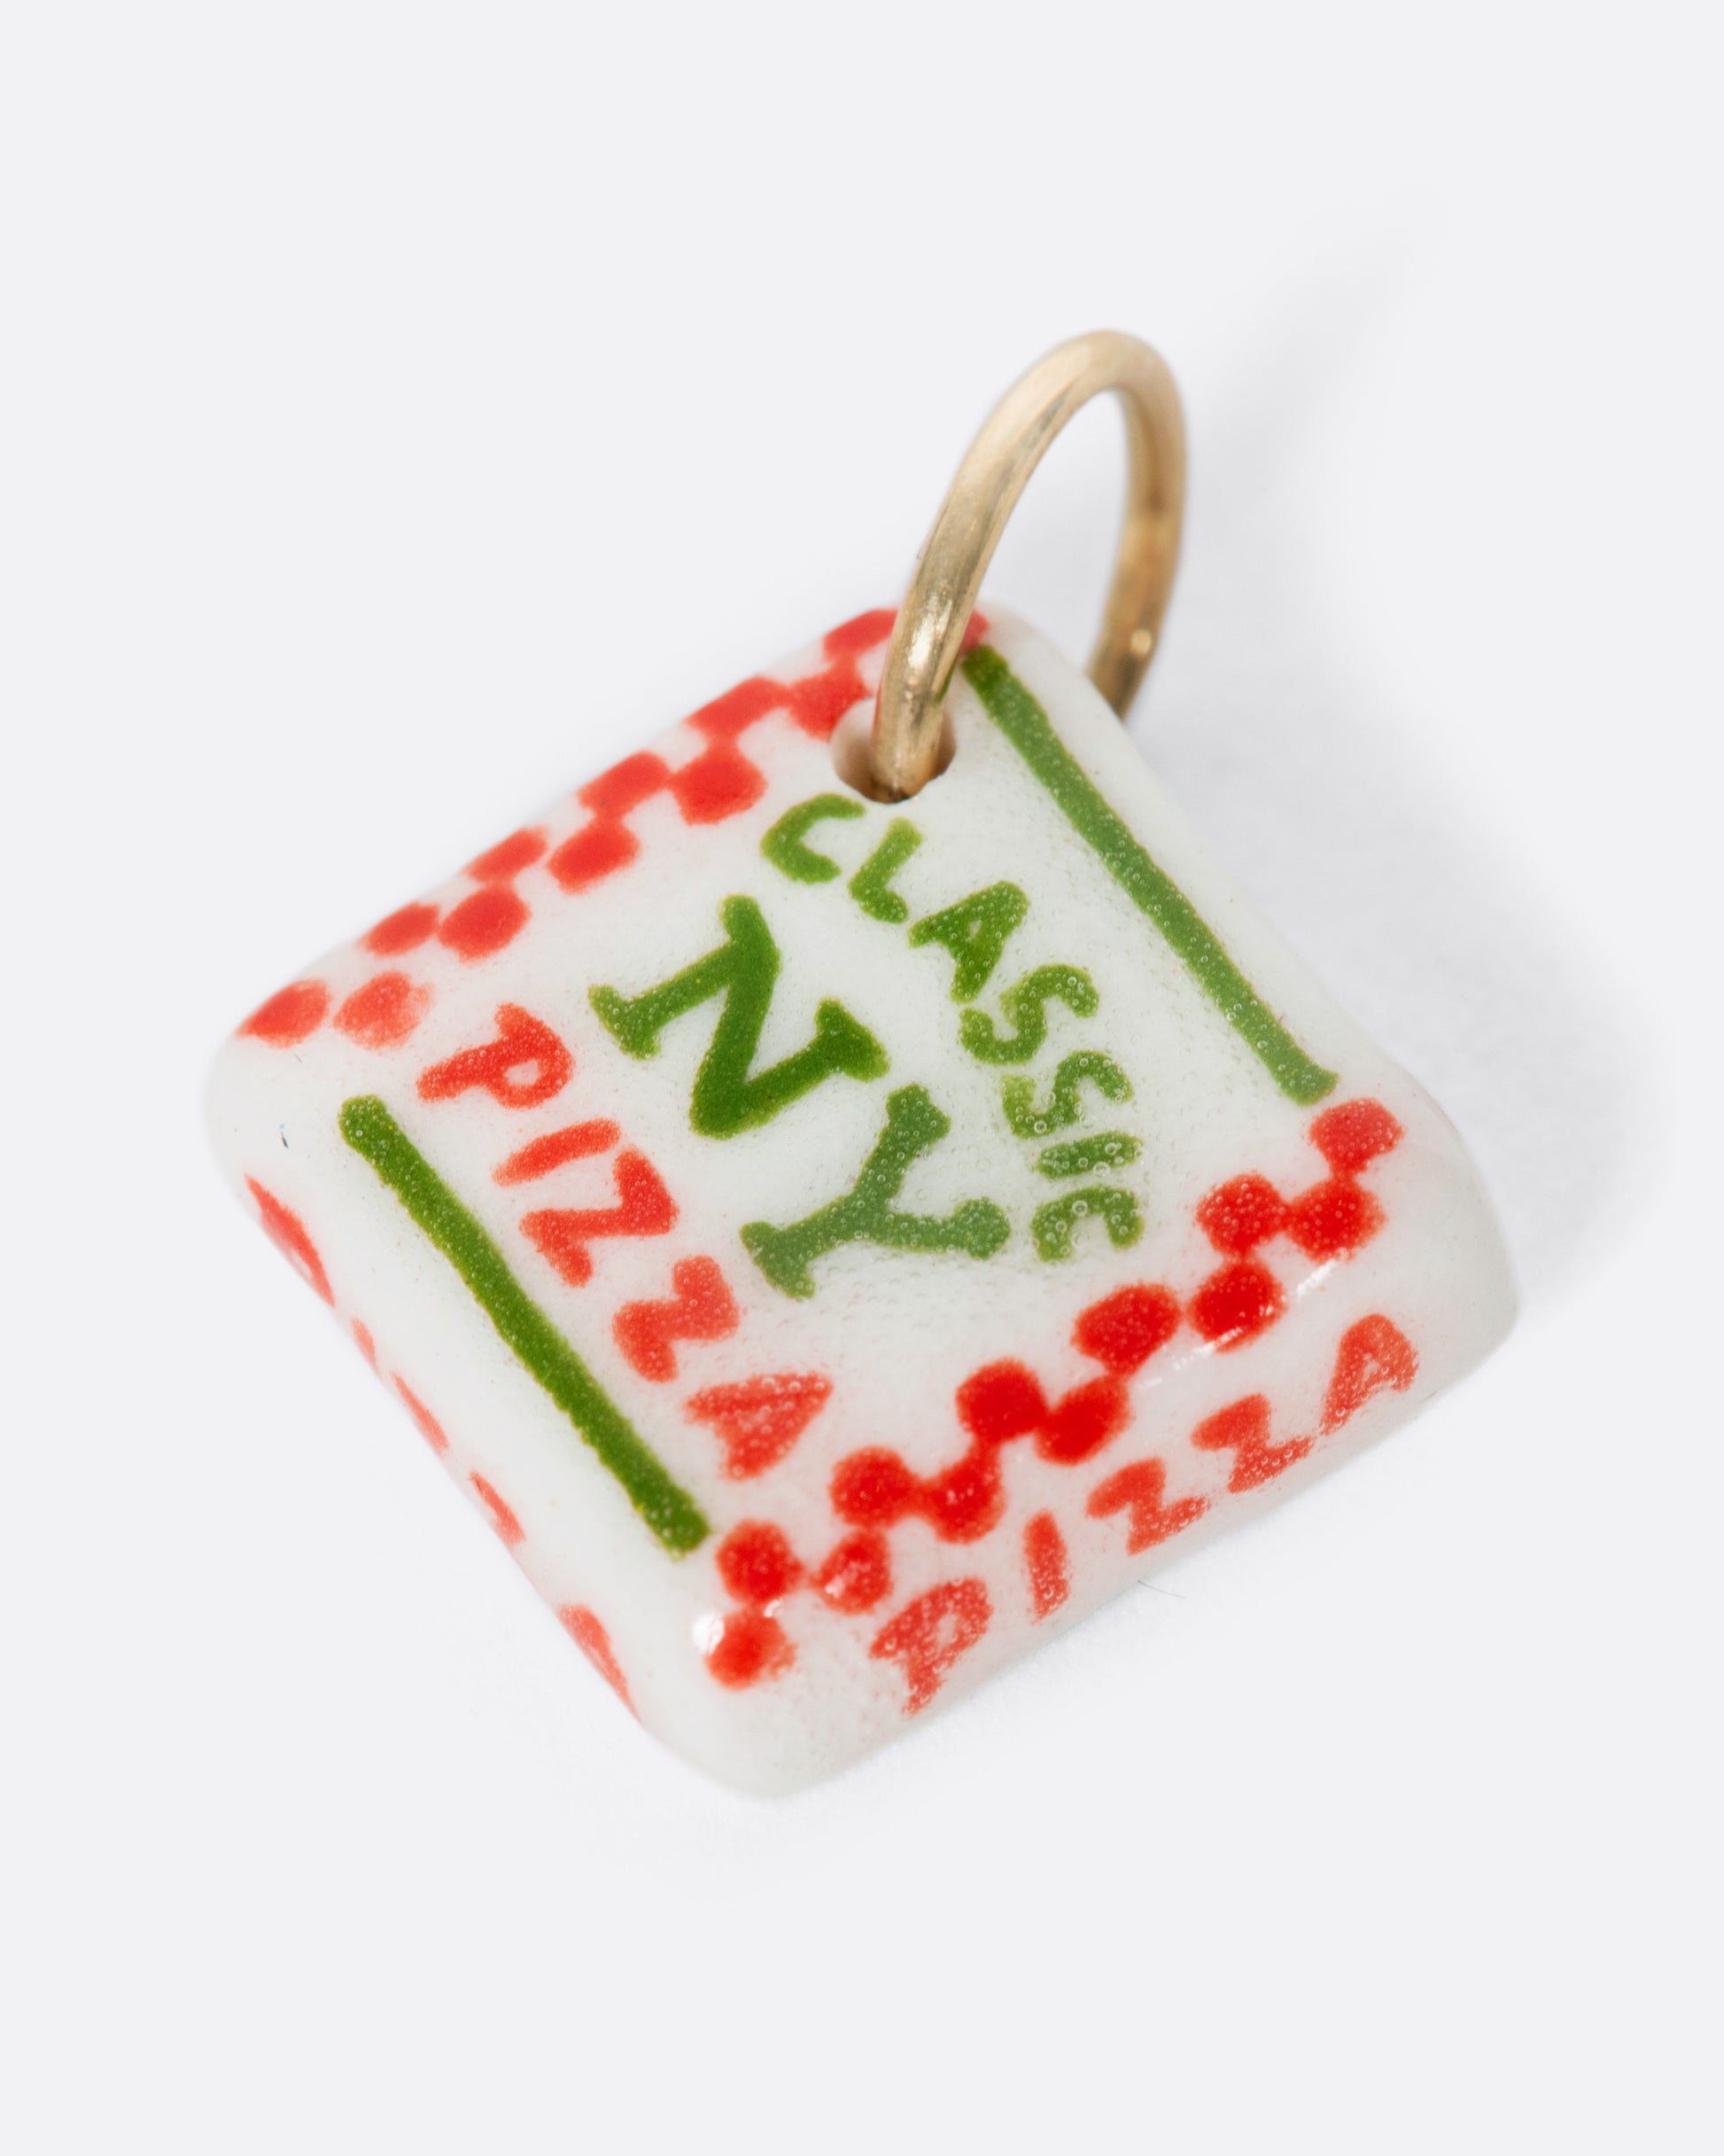 A white porcelain Classic New York pizza box charm with a yellow gold bail